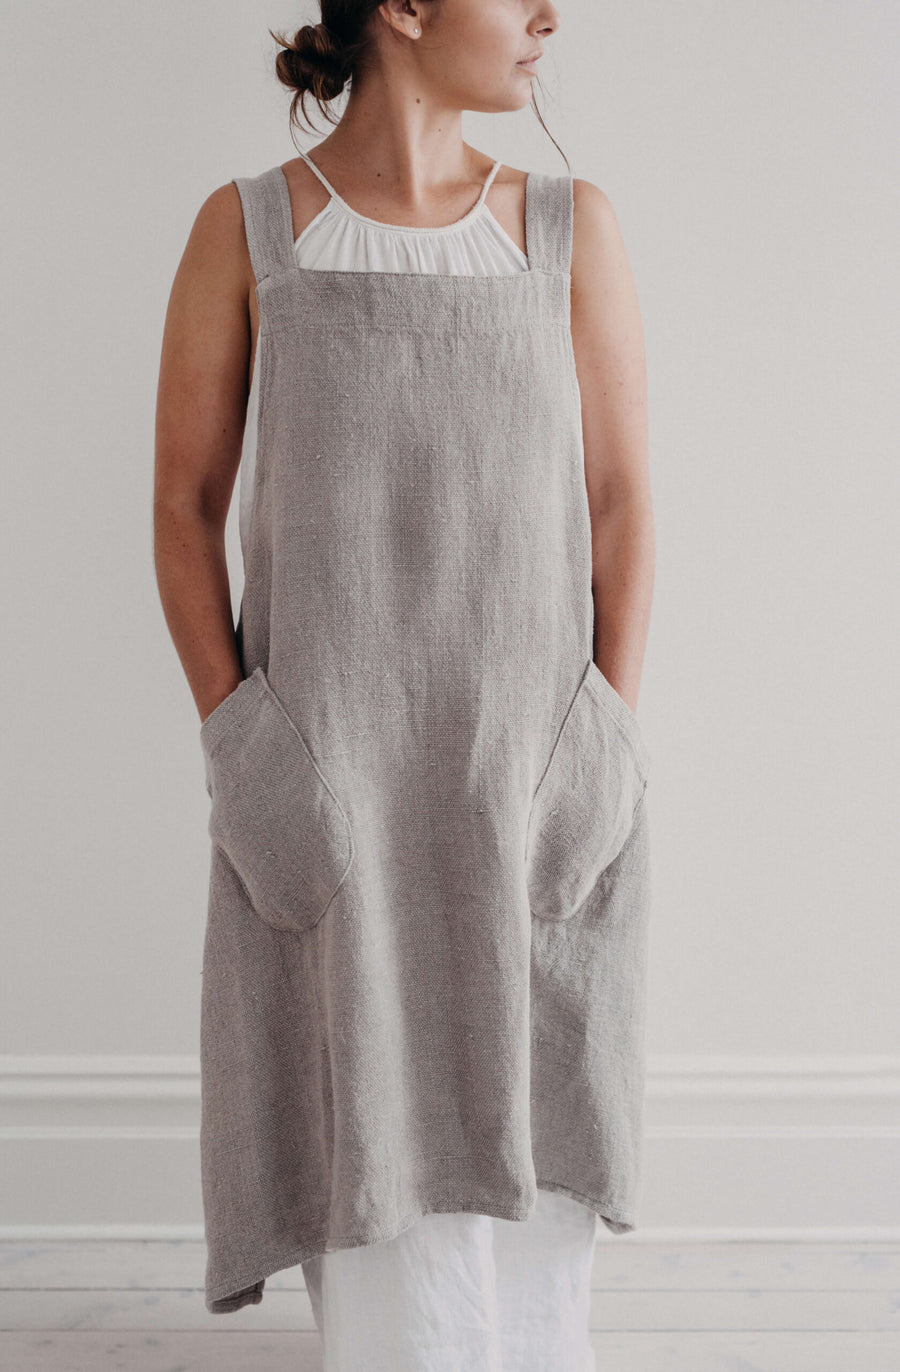 Harlow Woven Linen Apron - Putty